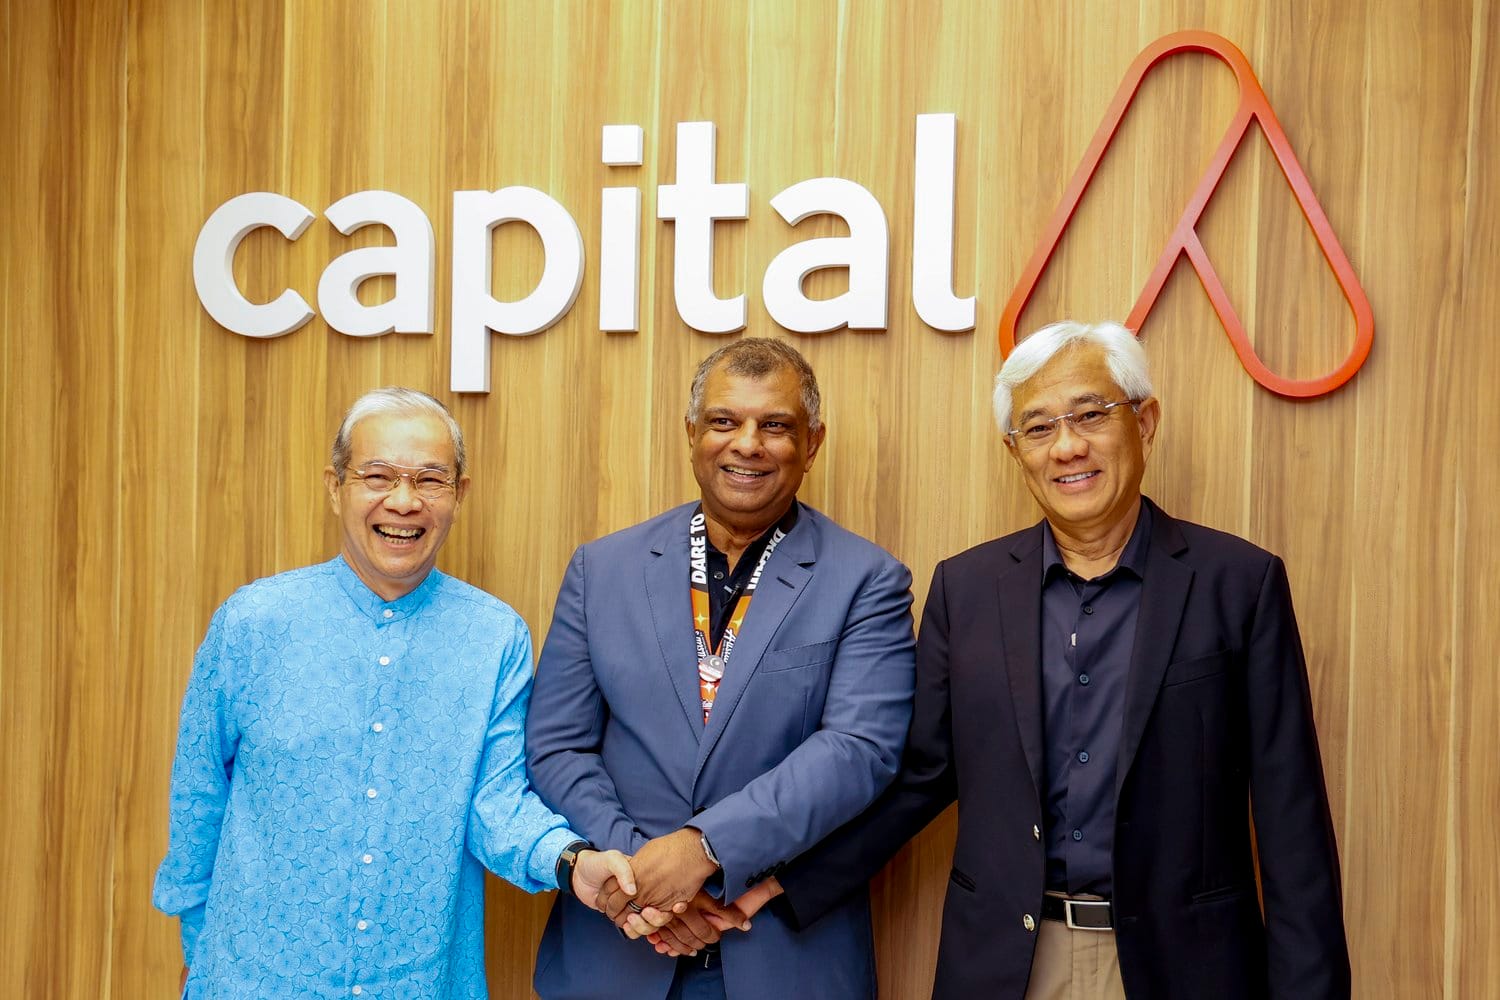 Capital A announces new 5-year service contract for CEO Tony Fernandes